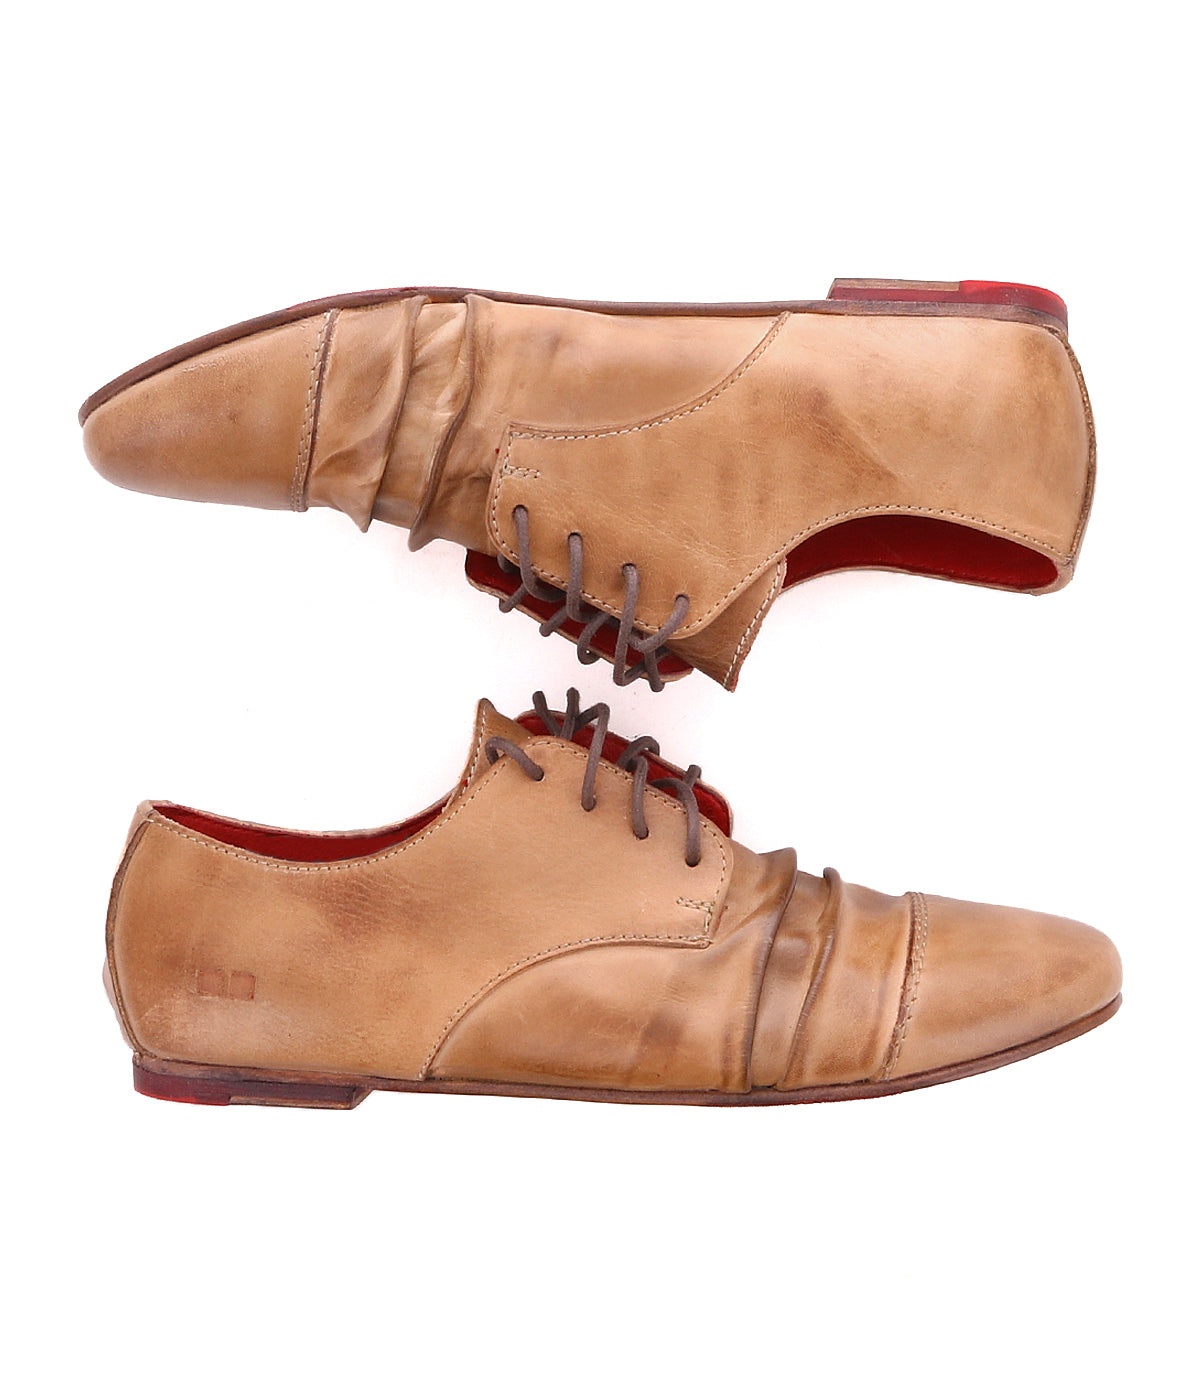 A pair of tan leather dress shoes with red soles and lace-up closures, crafted from buttery soft leather, shown from the side and top views. The Rumba II by Bed Stu.